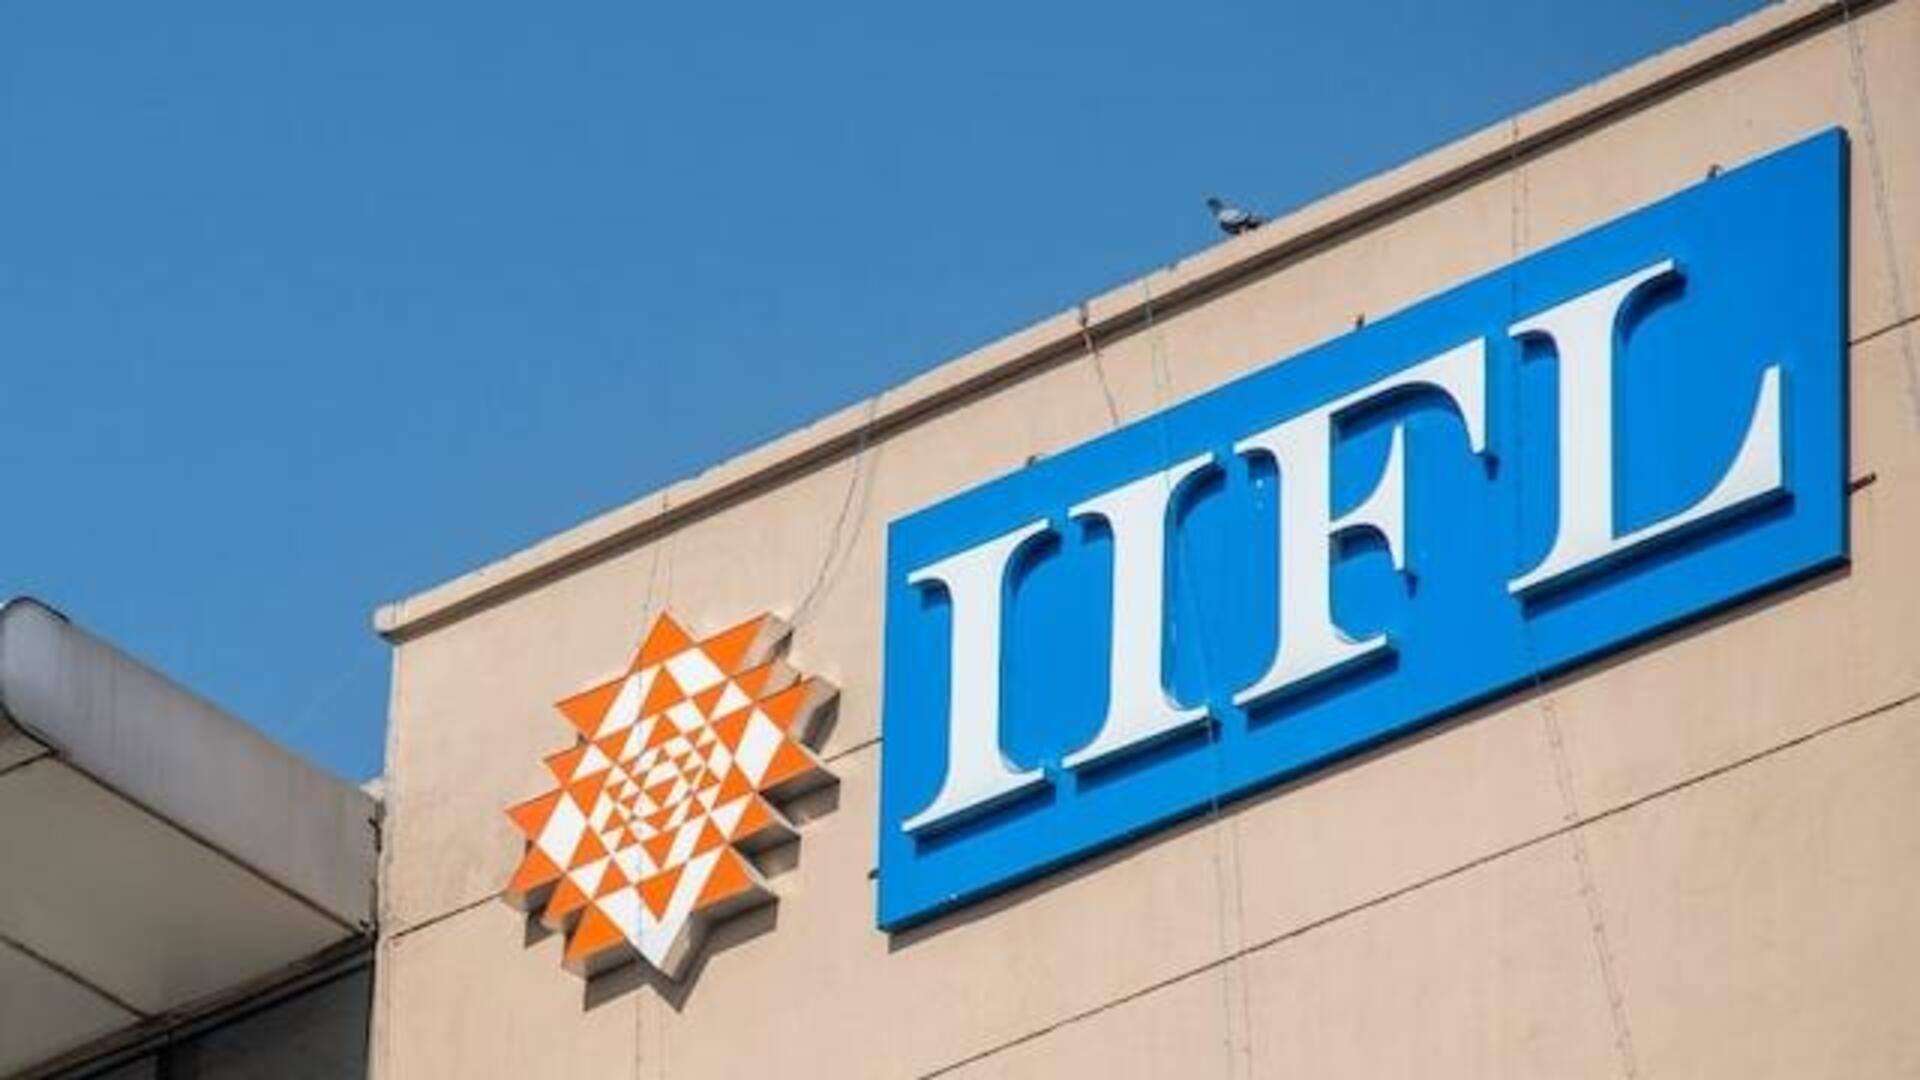 IIFL Finance plummets 20% for second day: Here's why